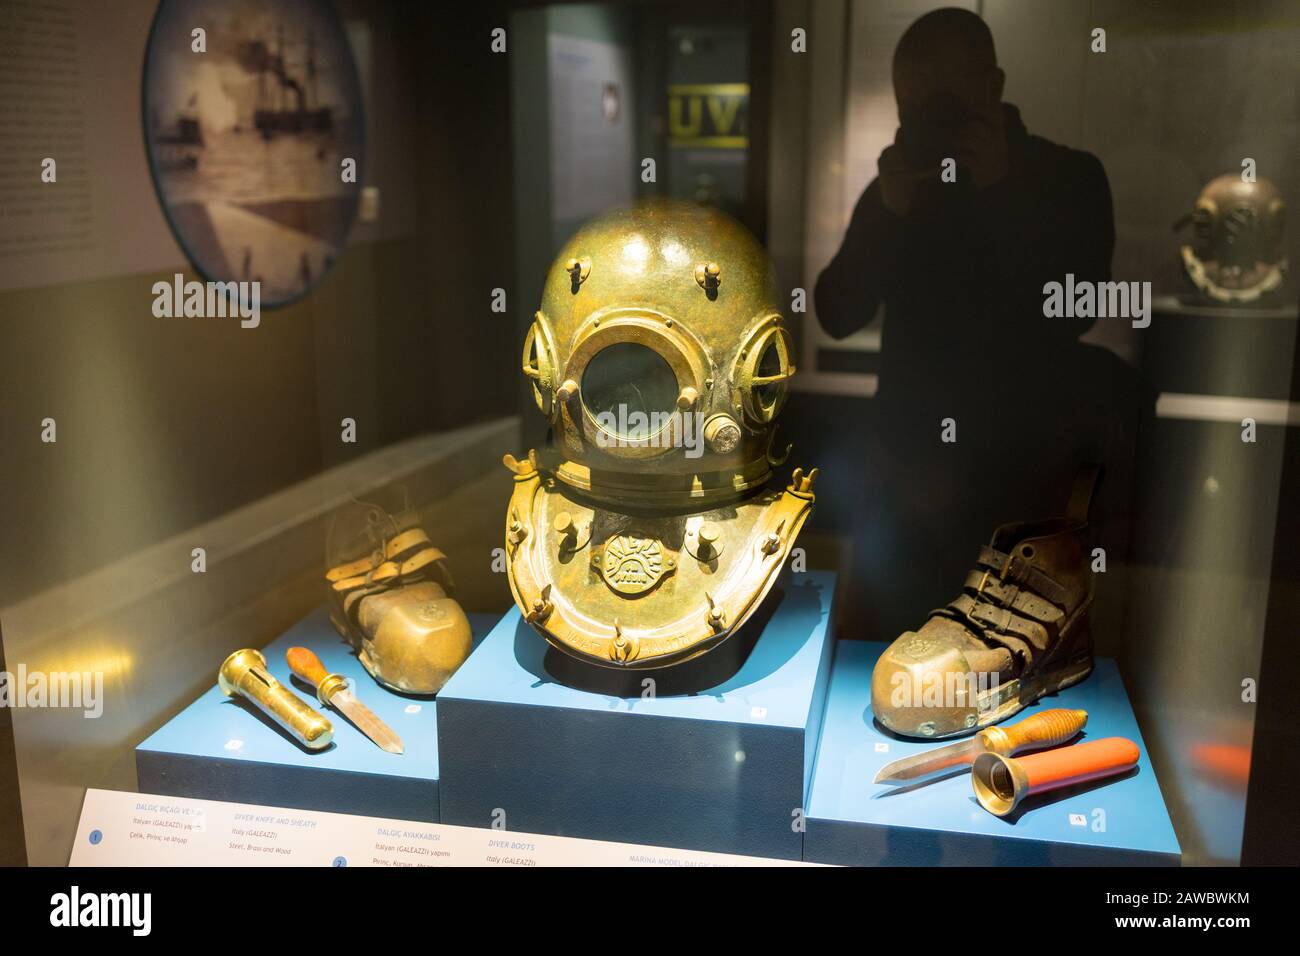 Istanbul, Turkey - Jan 12, 2020: diving equipment on display for Exhibition in The Istanbul Naval Museum, Turkey. Stock Photo